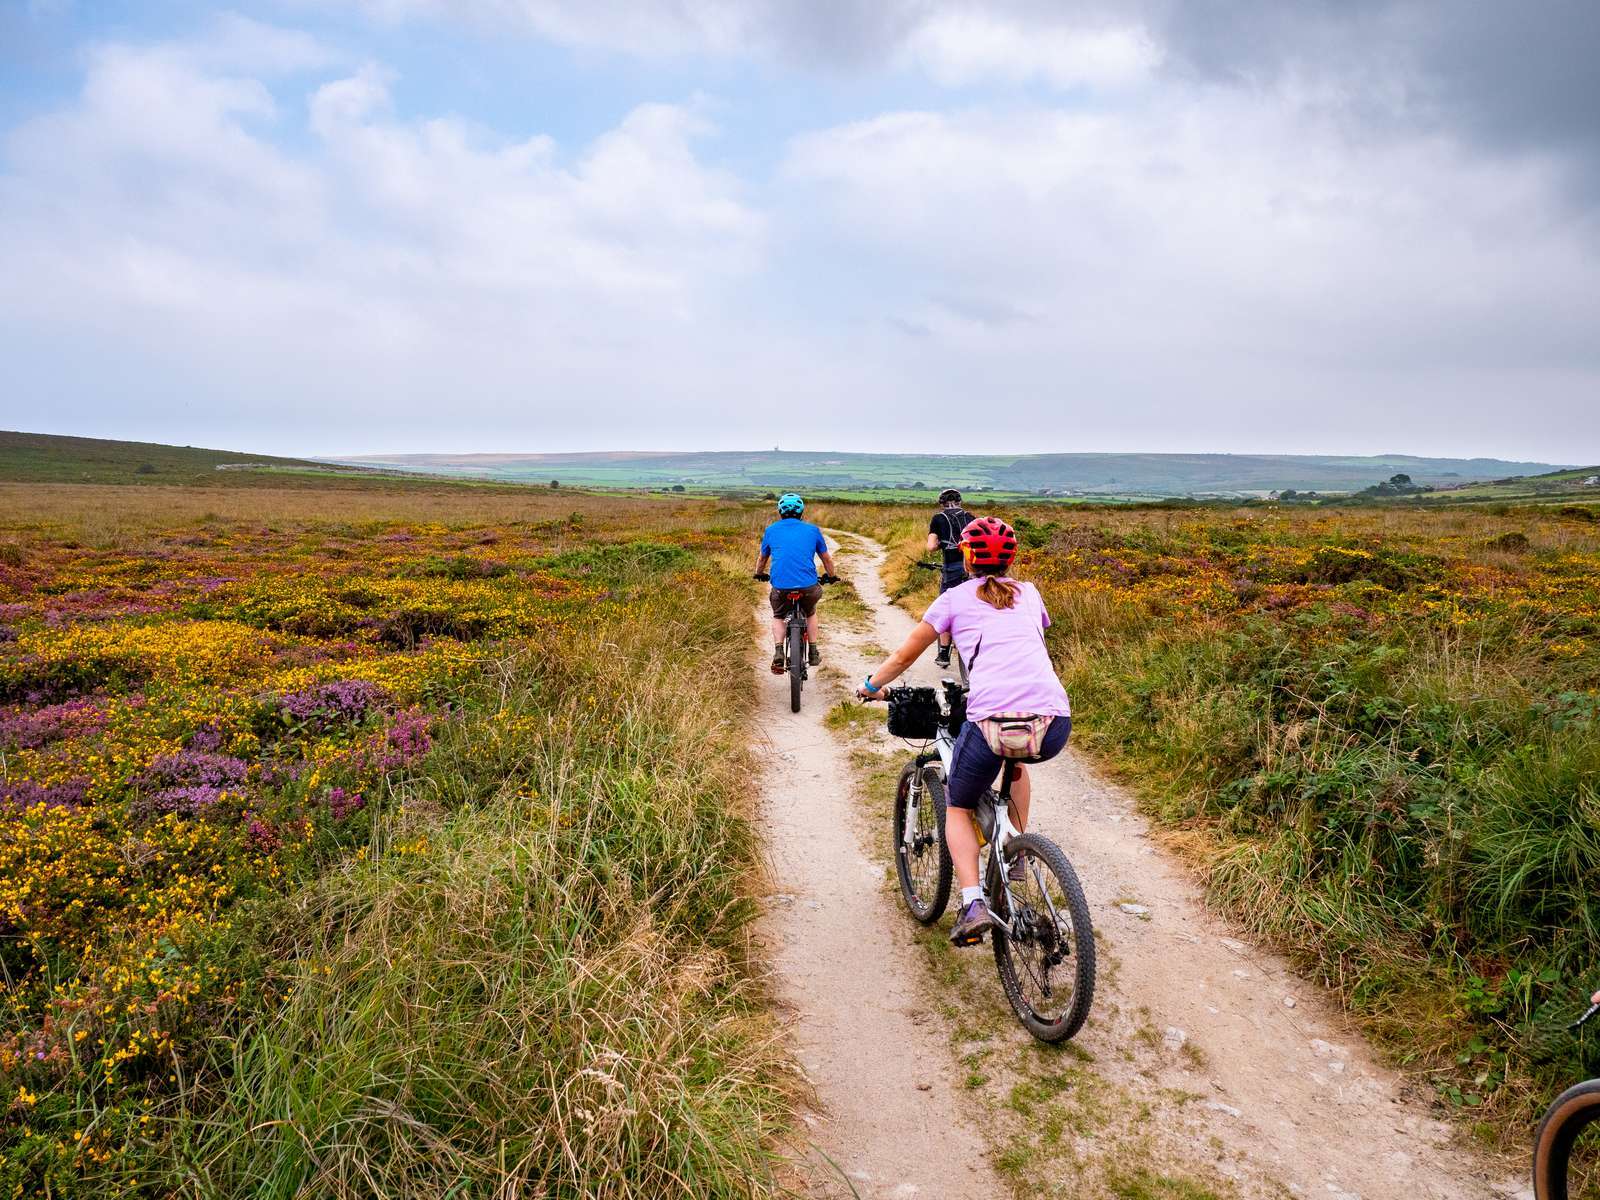 Cyclists on the Tinner's Way, in Cornwall